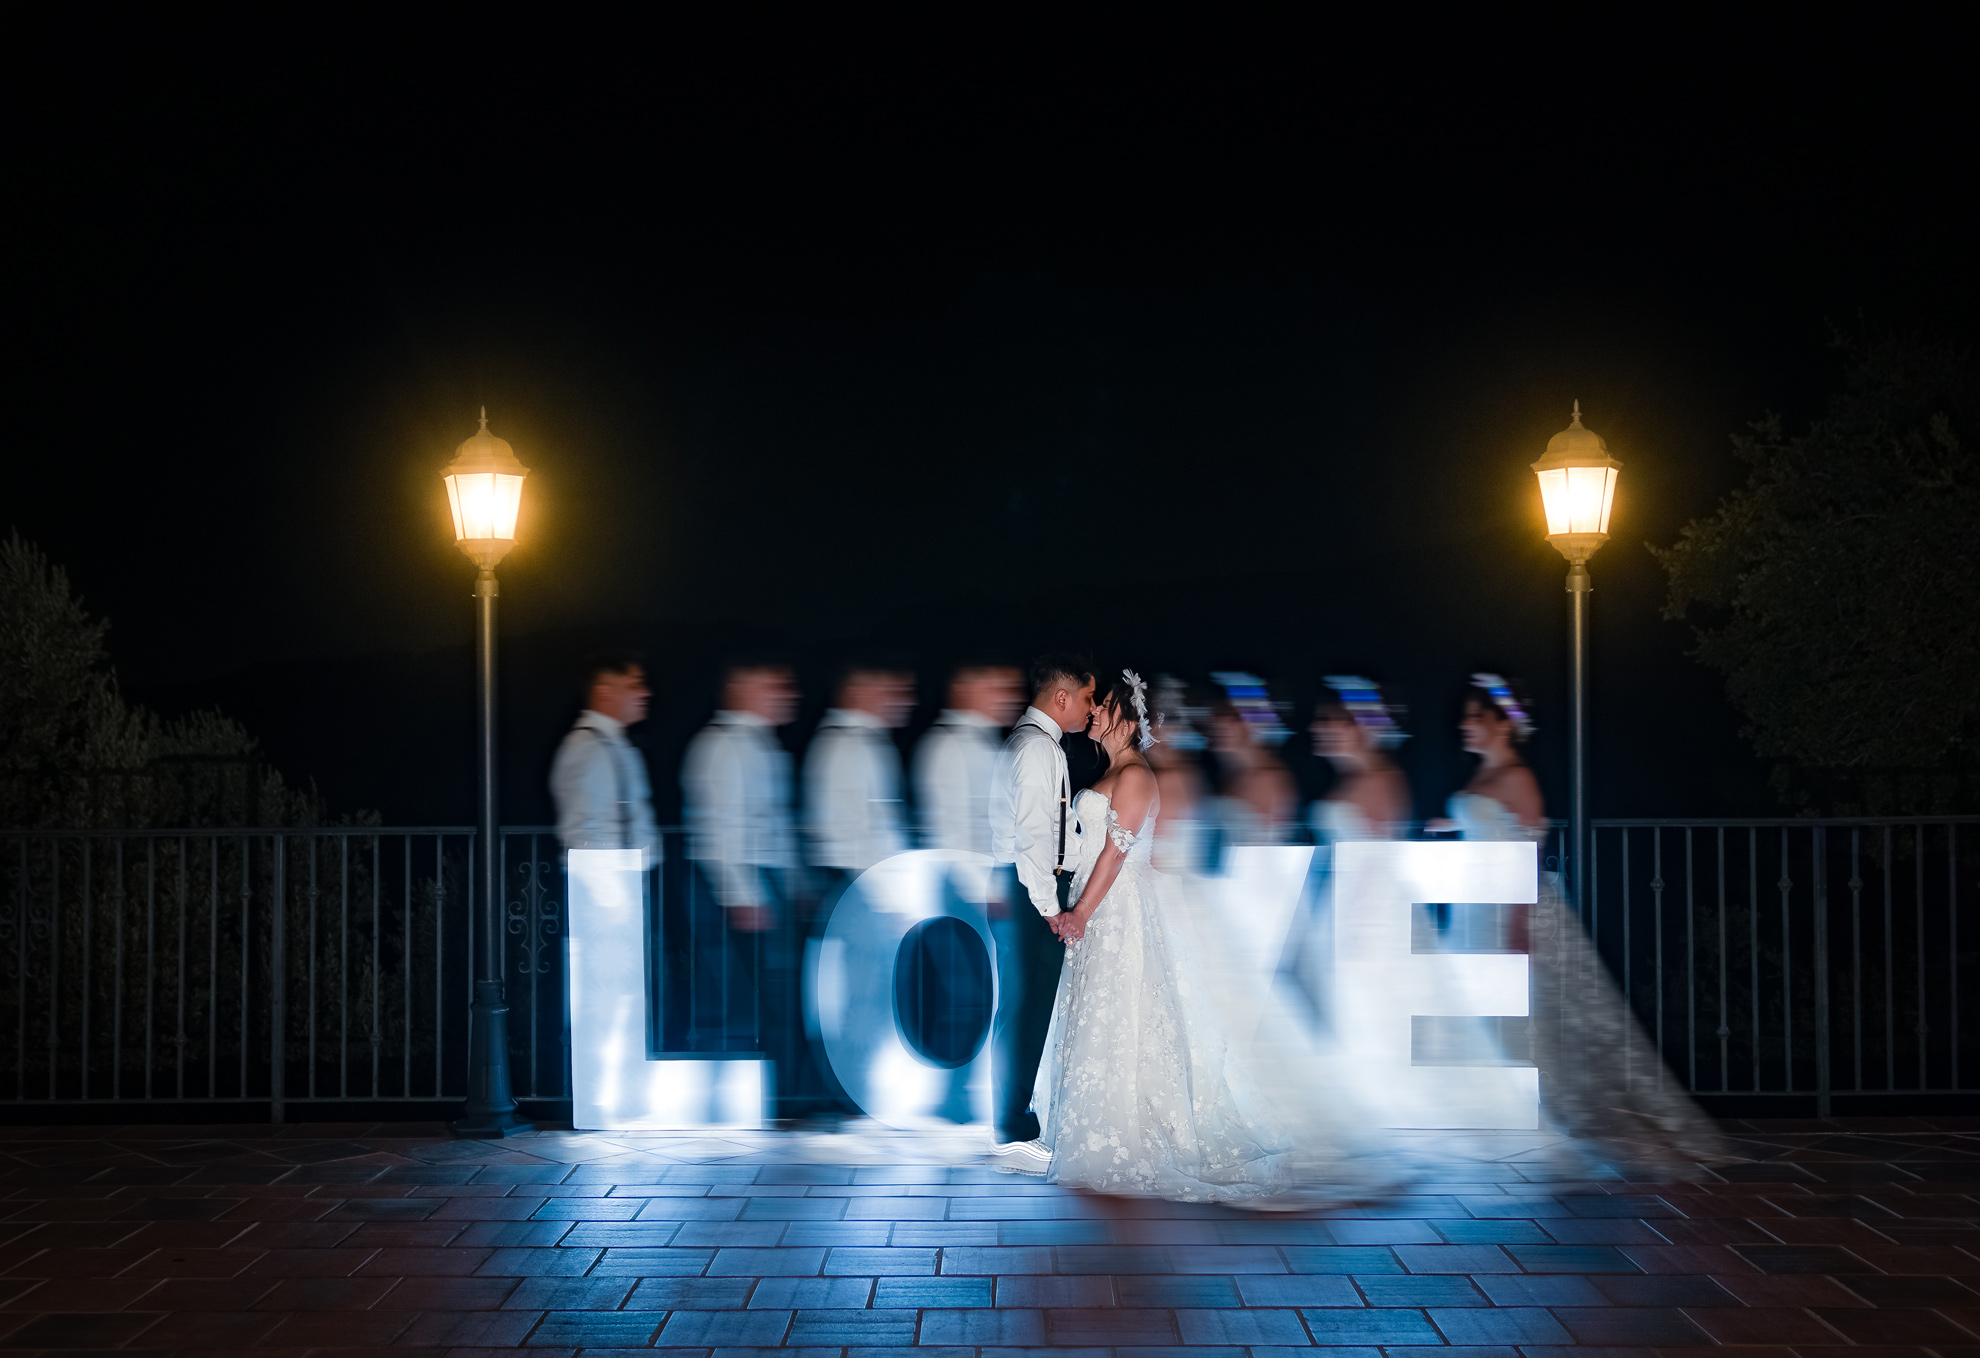 ThomasKim Photography Los Angeles Wedding Photographer A Los Angeles Wedding Photographer captures a bride and groom standing in front of a lit up love sign.